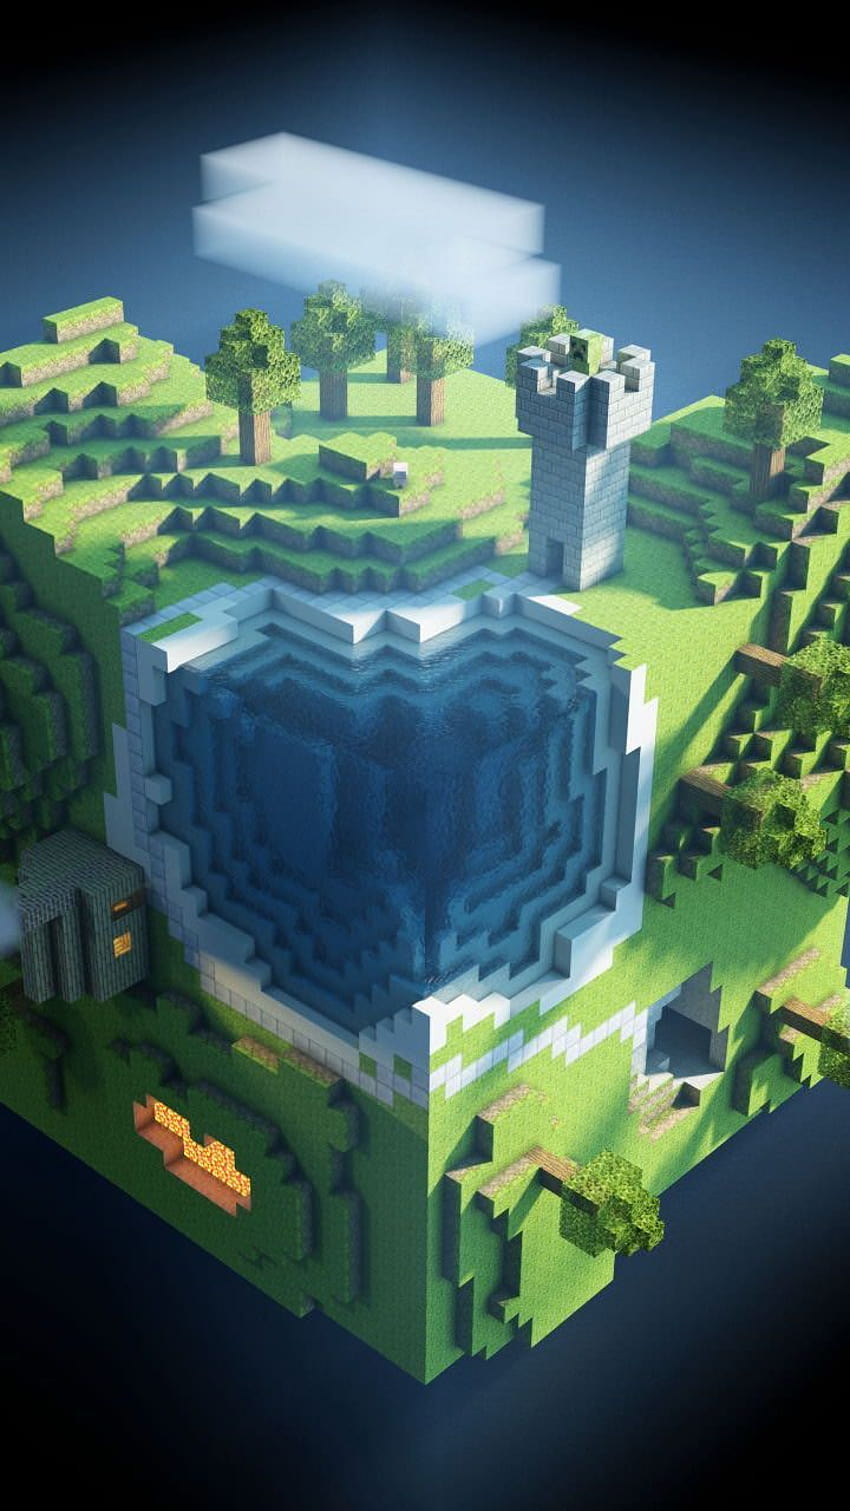 7 Mc phone wallpapers by me ideas  minecraft wallpaper minecraft  pictures phone wallpaper